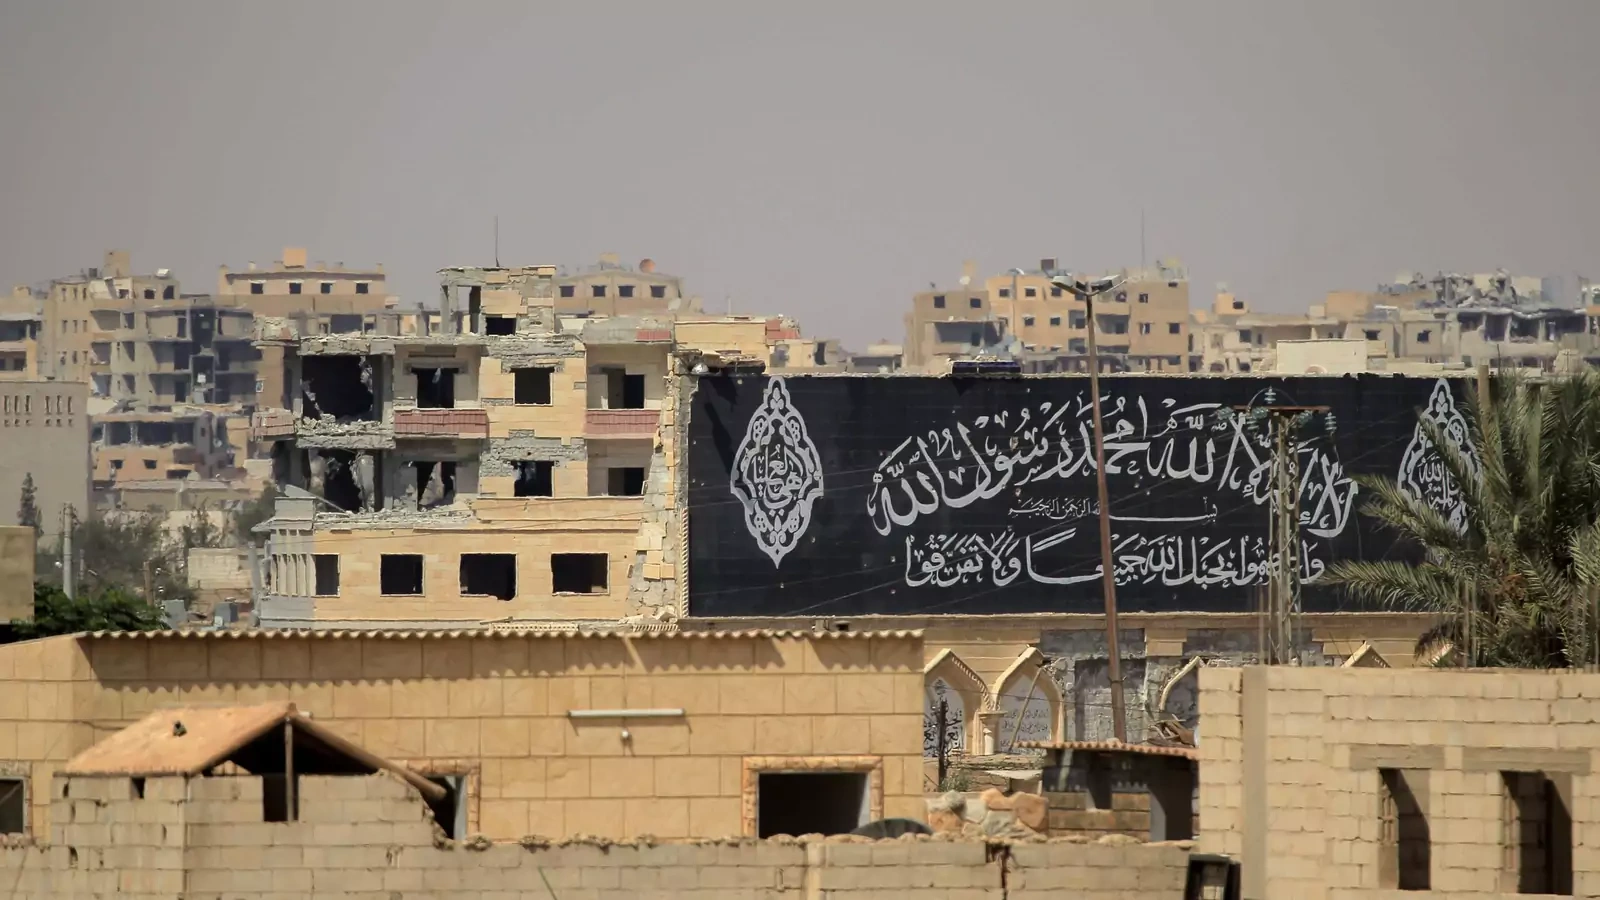 A banner belonging to Islamic State fighters is seen during a battle with members of the Syrian Democratic Forces in Raqqa, Syria, on August 16, 2017.